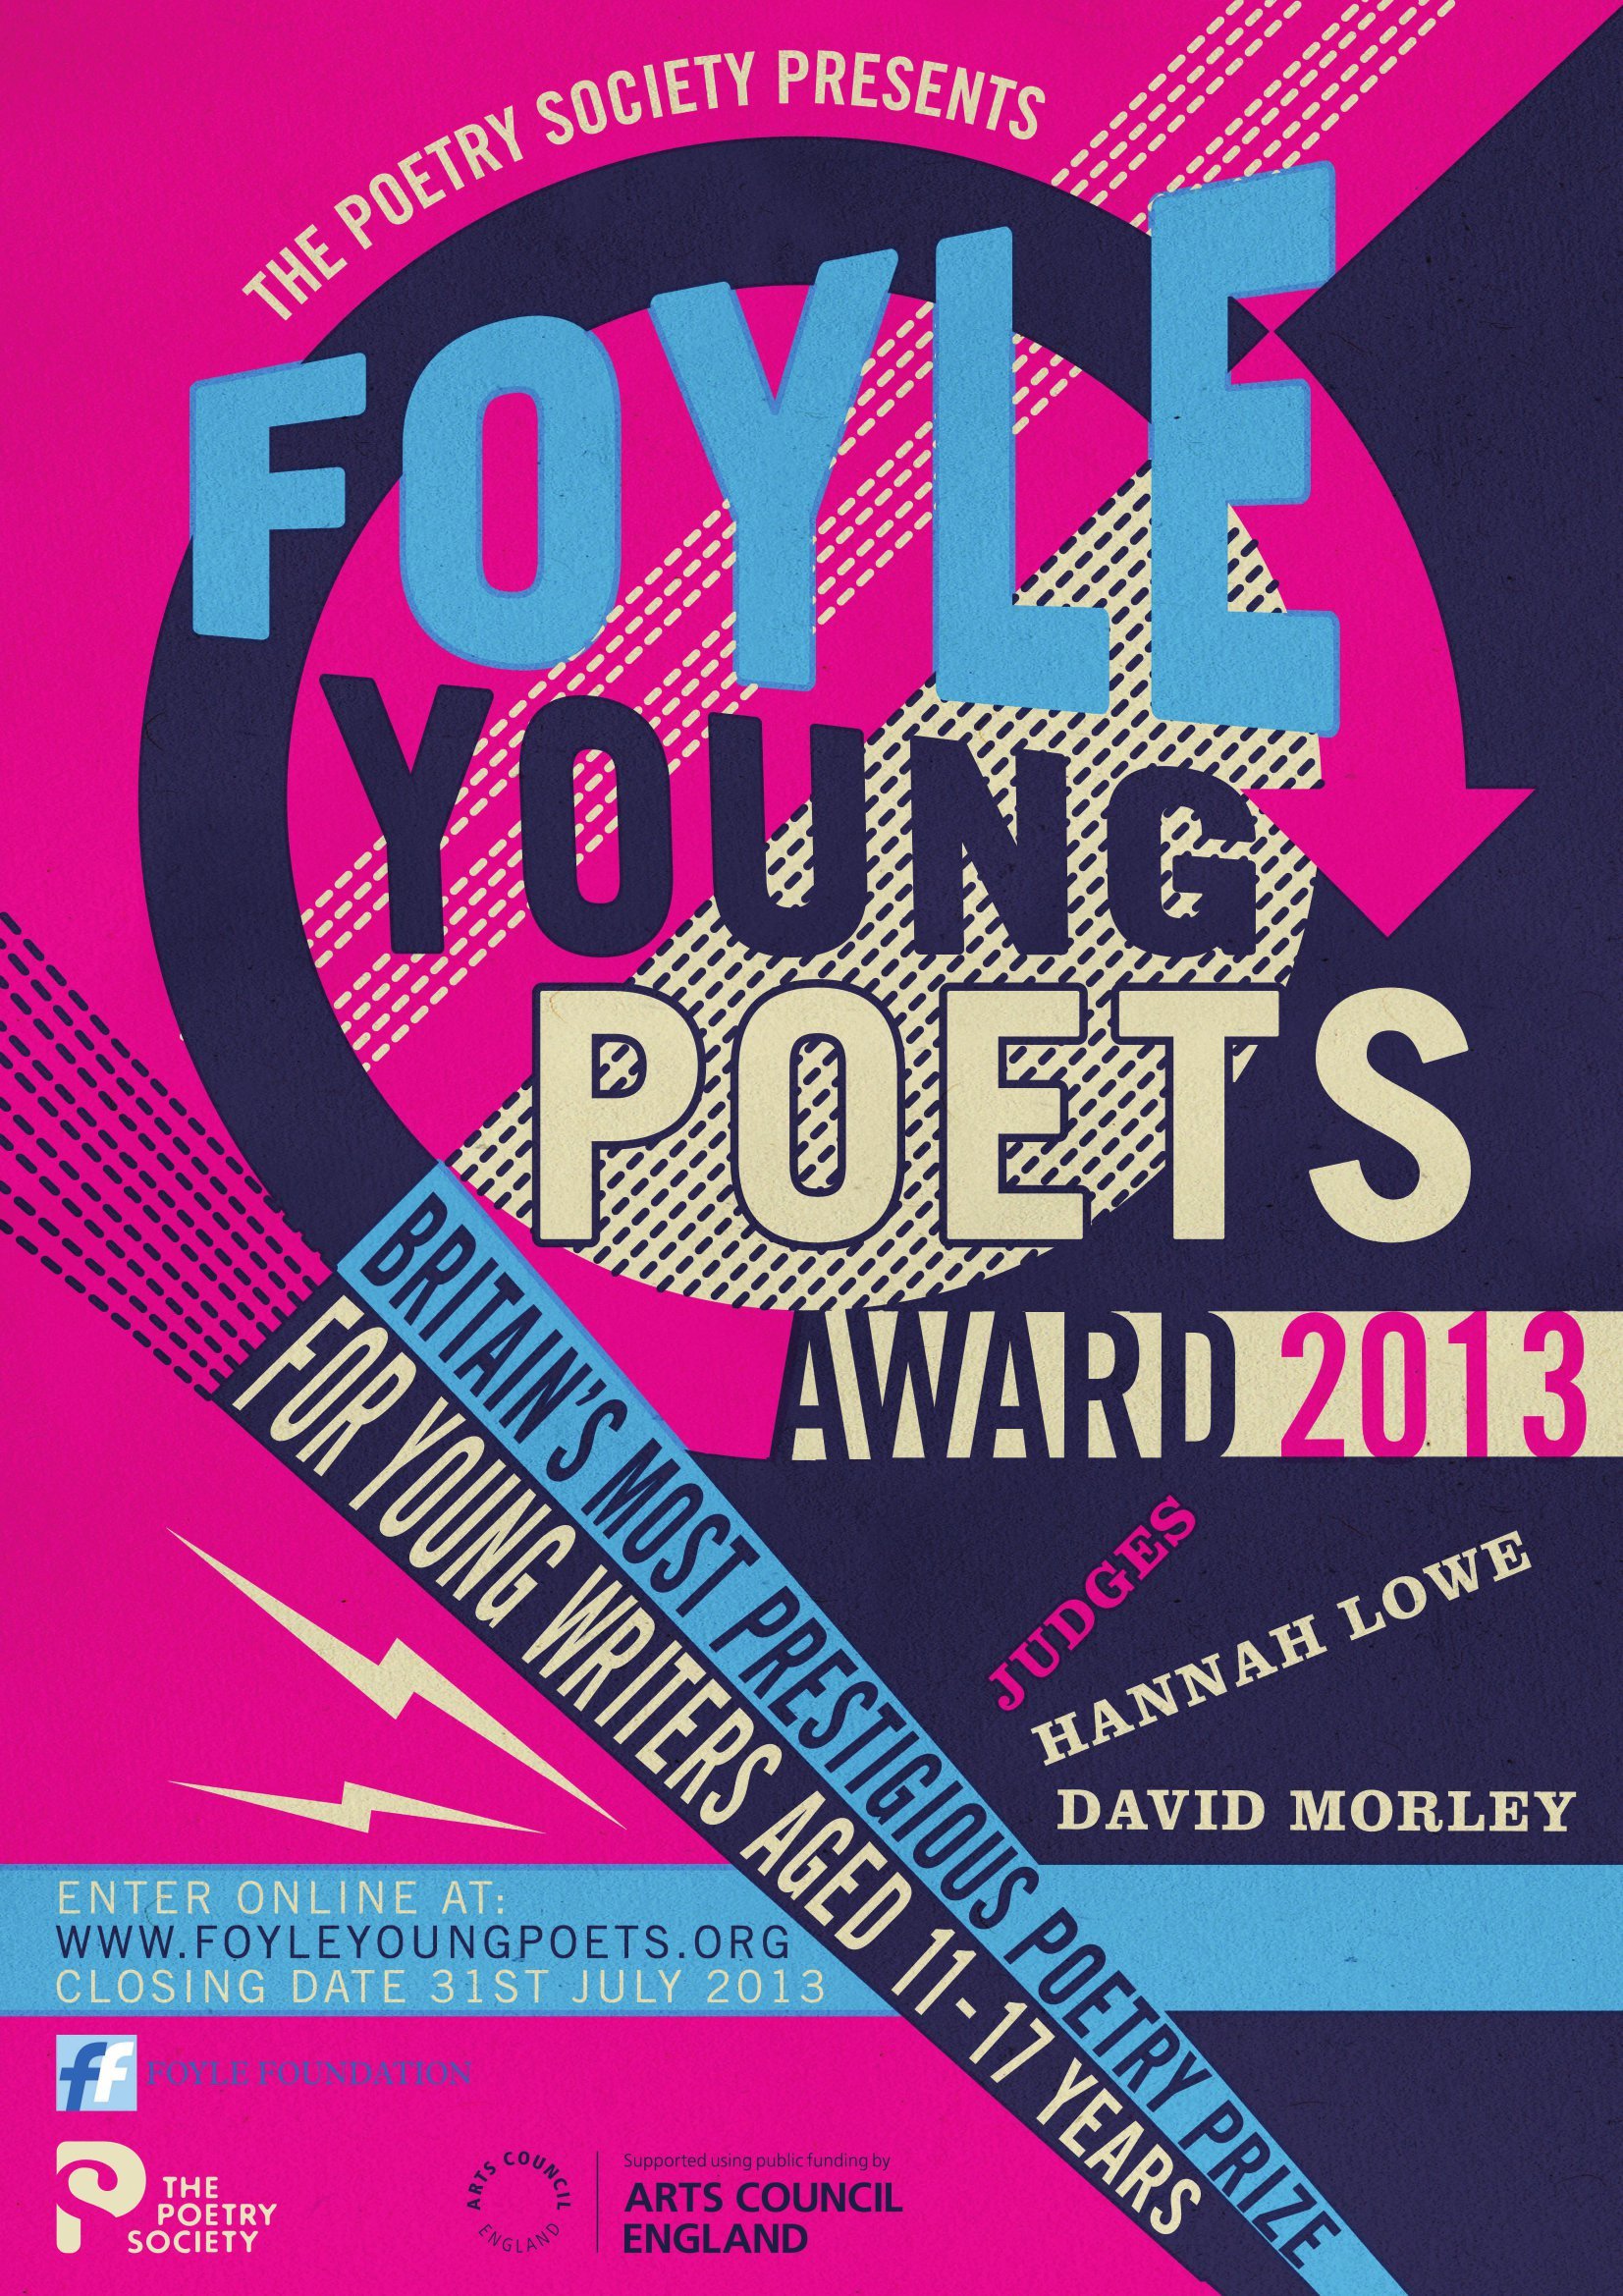 The Foyle Young Poets of the Year Award 2013